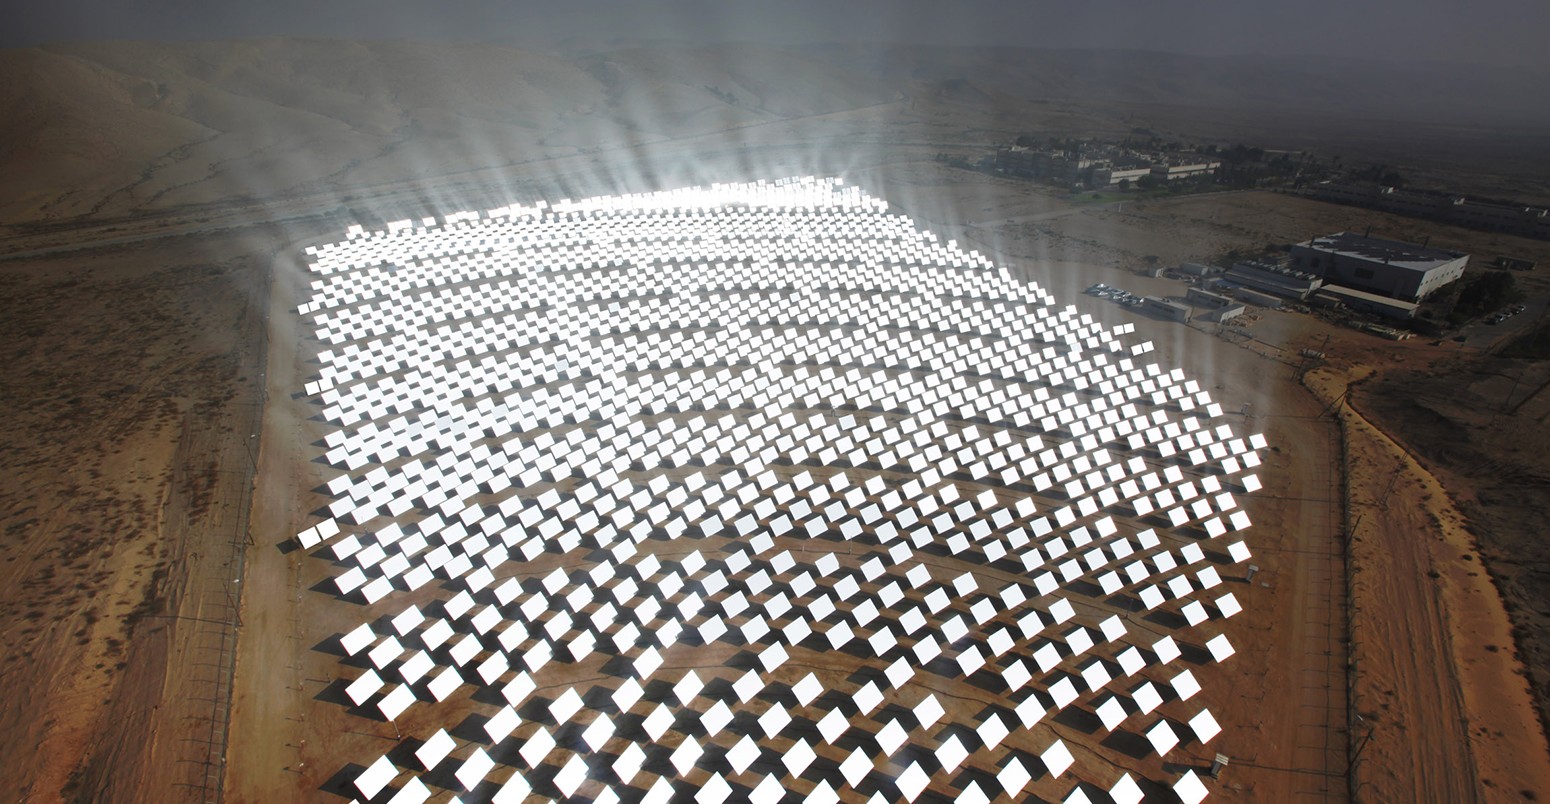 The 'world's largest solar plant' is currently powering 140,000 homes in the US